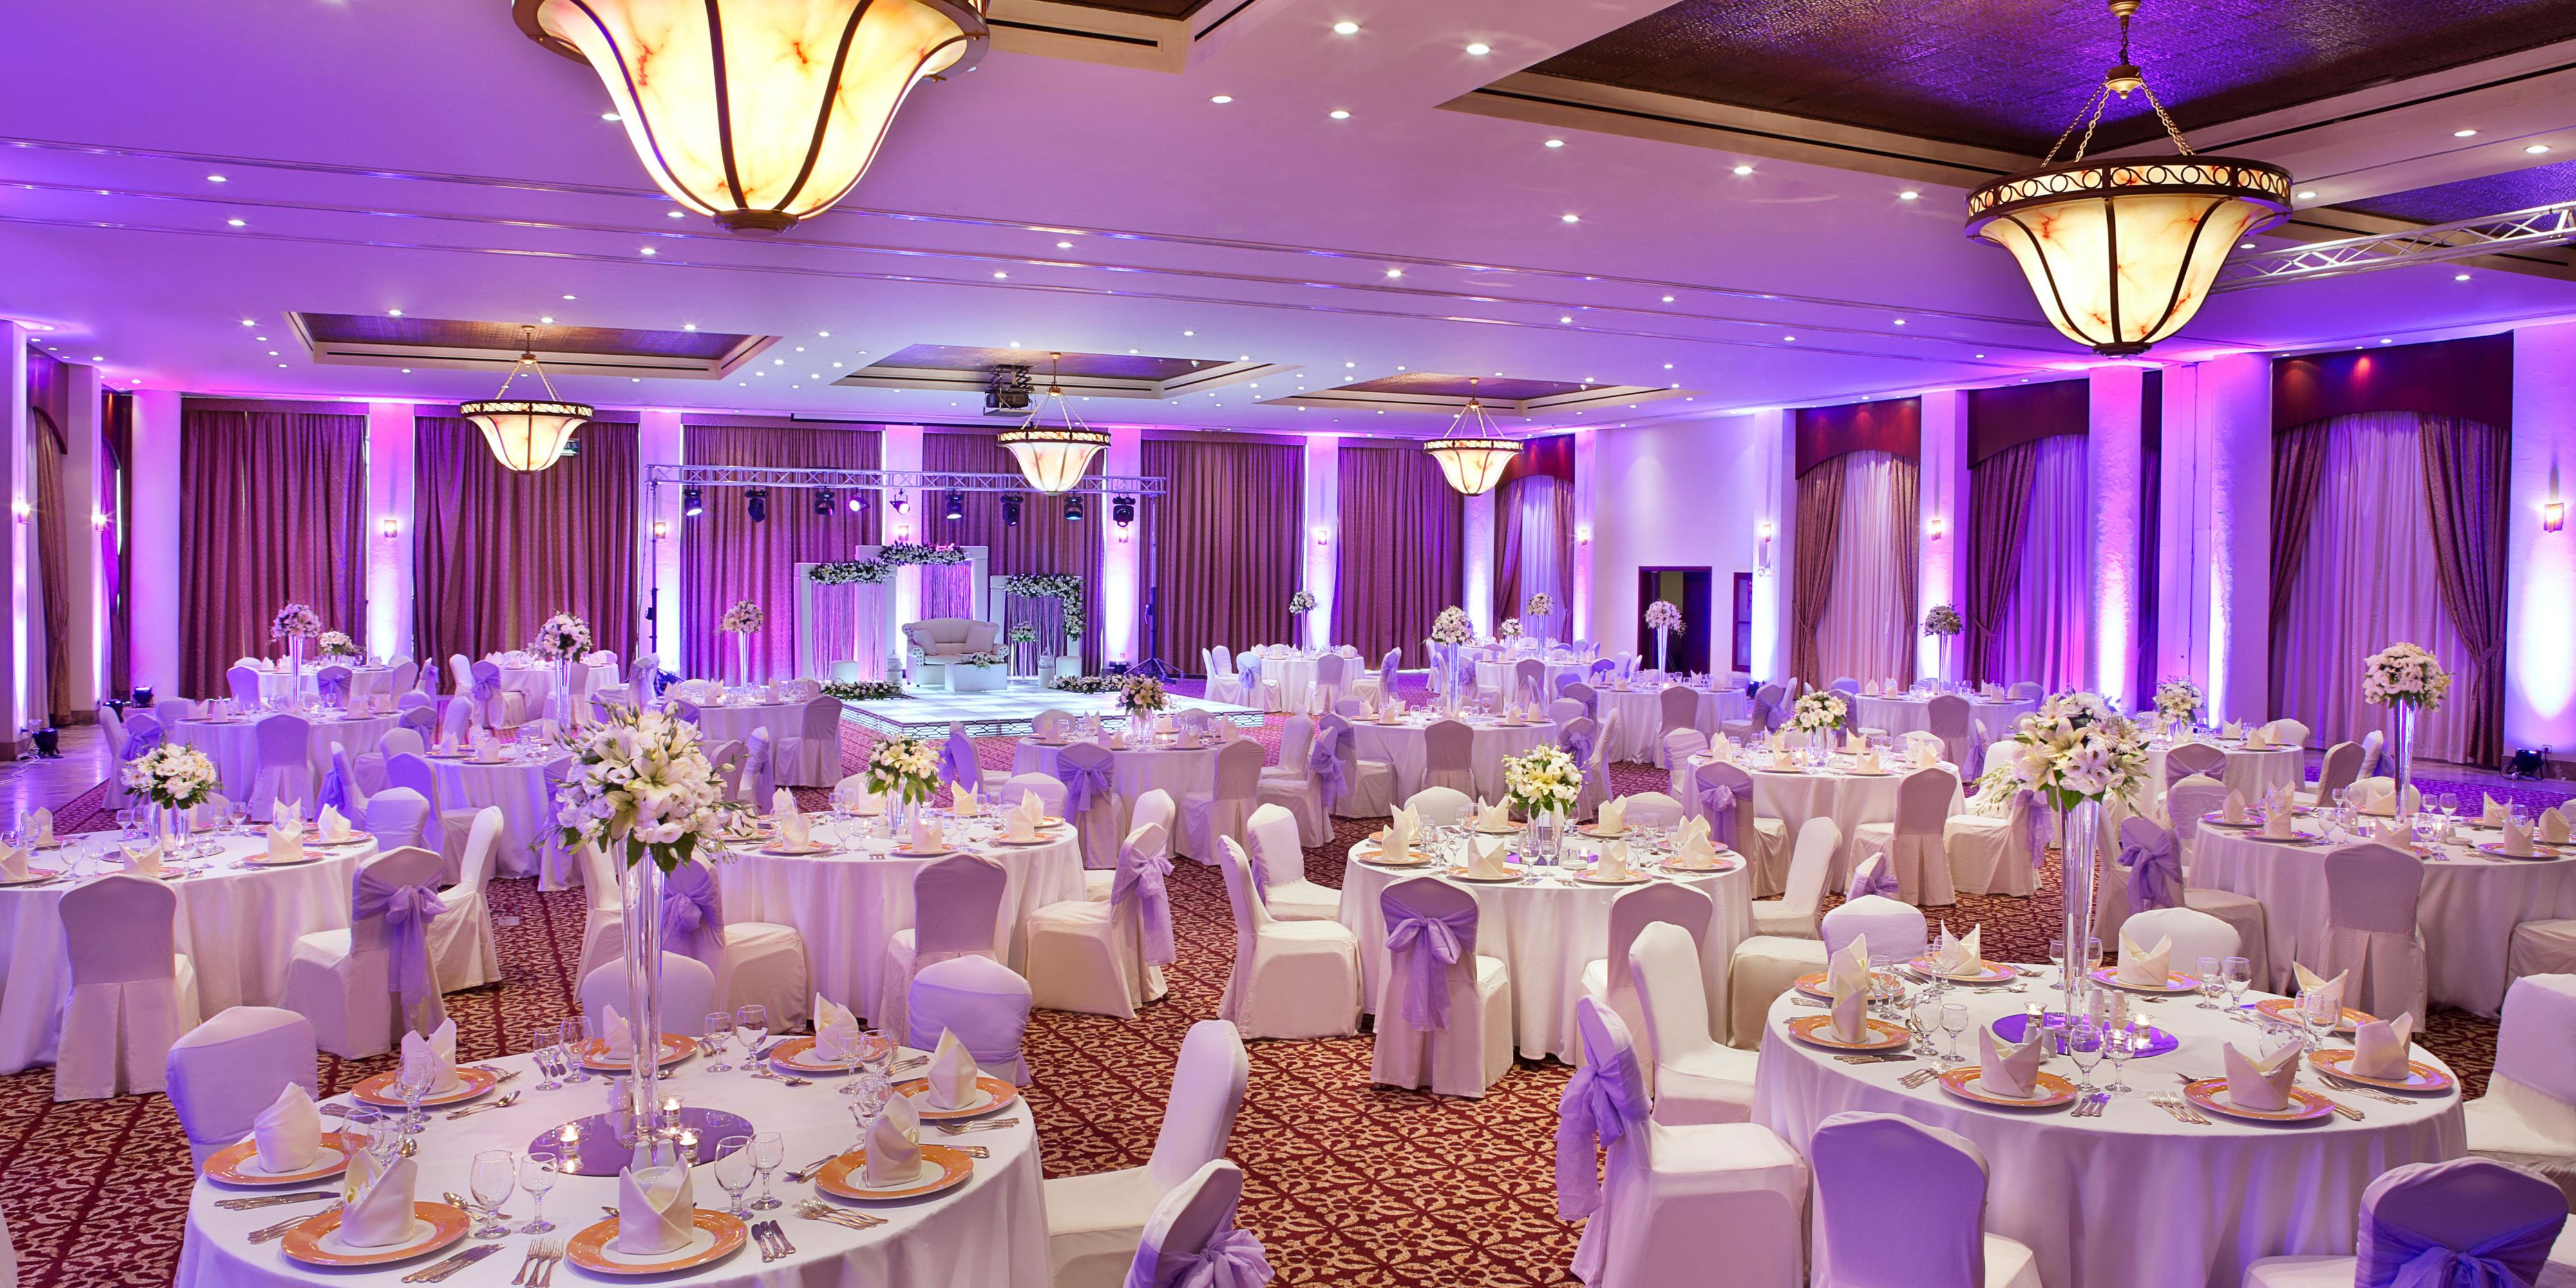 Celebrate your love story at our hotel, with a wedding venue that will exceed your expectations. Our grand ballroom, lush gardens, and the Beach are just a few of the enchanting spaces available to 
host your ceremony and reception. Our team of professionals will work with you to create a 
personalized experience, complete with exceptional cuisine.